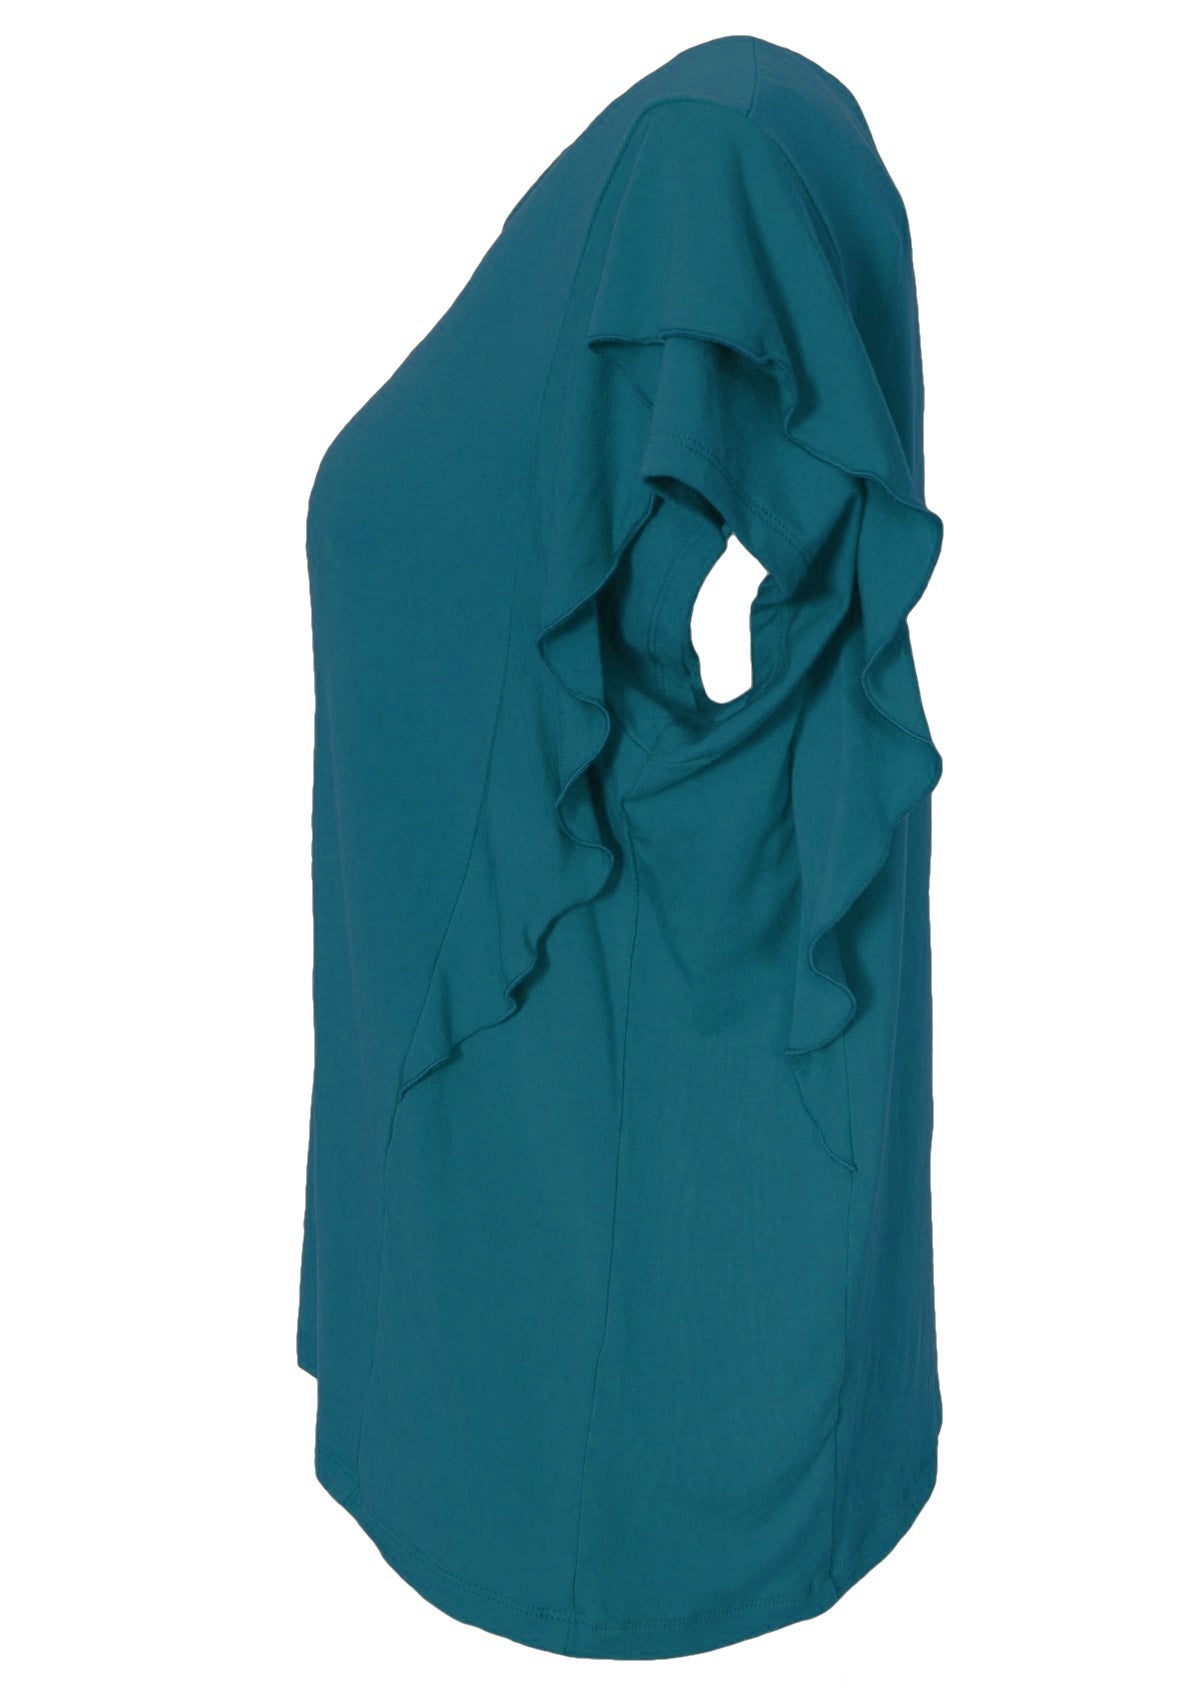 Side view of a teal ruffle rayon top.